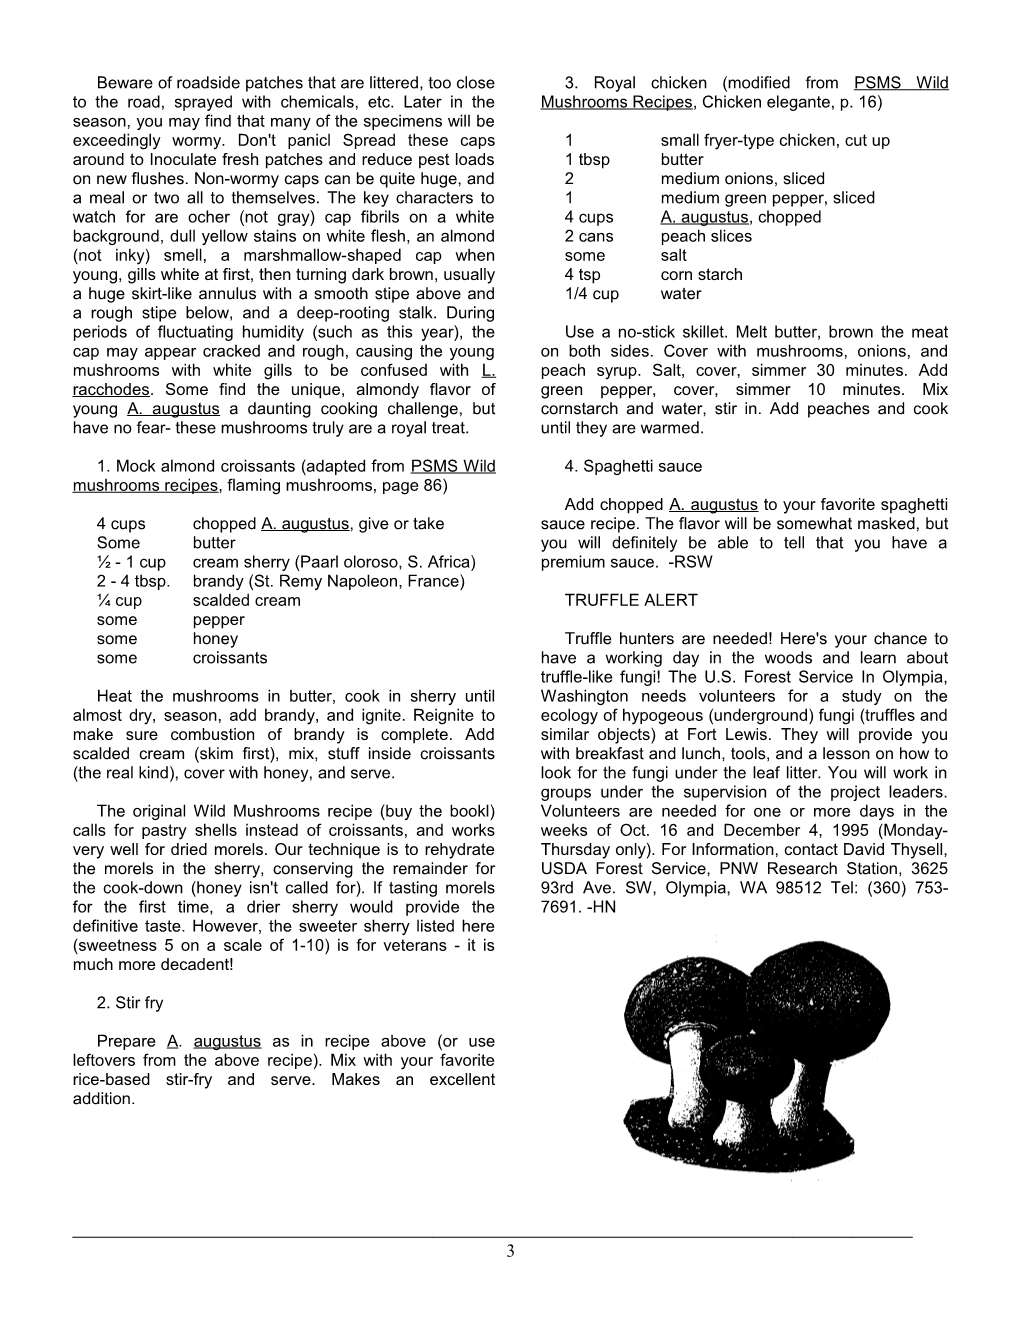 August, 1995South Vancouver Island Mycological Societyvol. 2.6